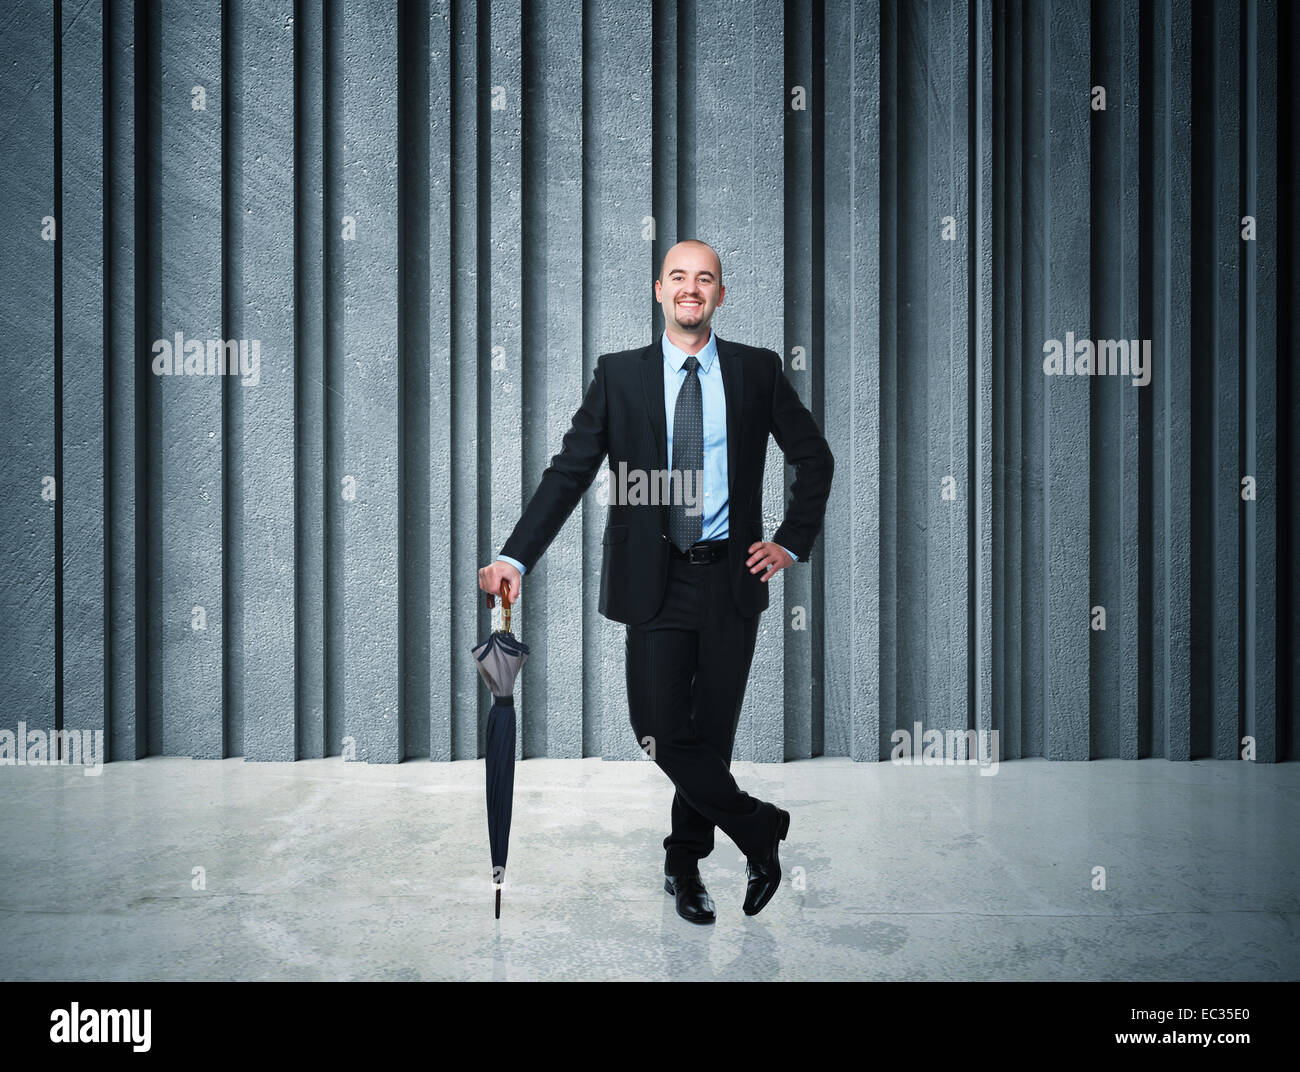 positive businessman and concrete background Stock Photo